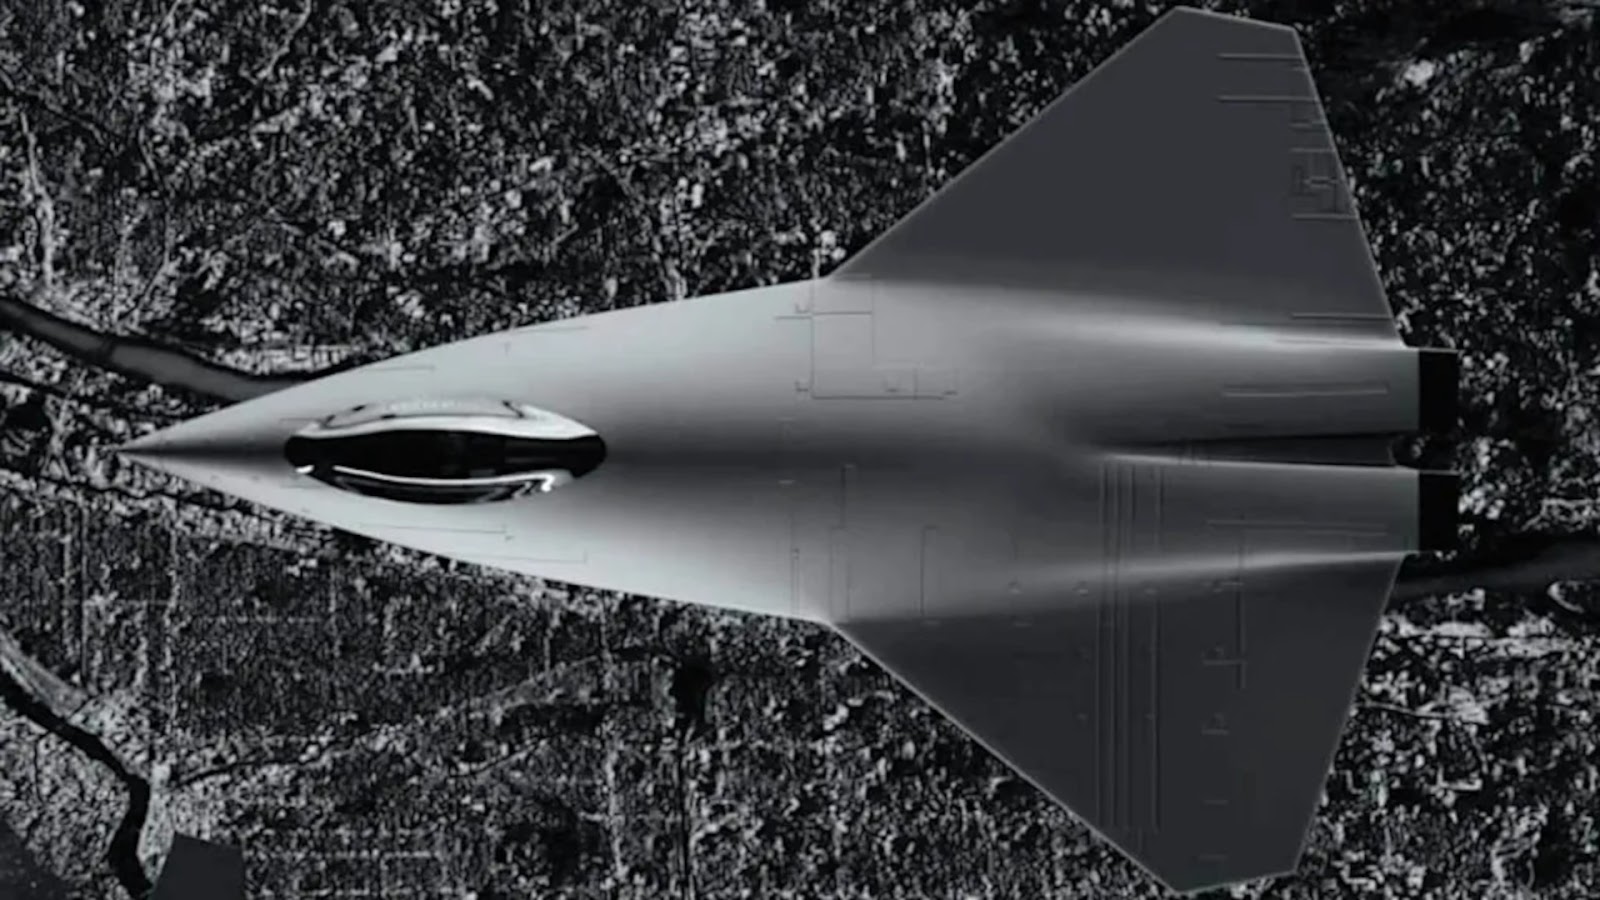 The US Air Force is taking a second look at the crewed sixth-generation stealth combat jet it is developing under the Next Generation Air Dominance initiative to see where costs could be cut, even at the cost of losing certain capabilities.